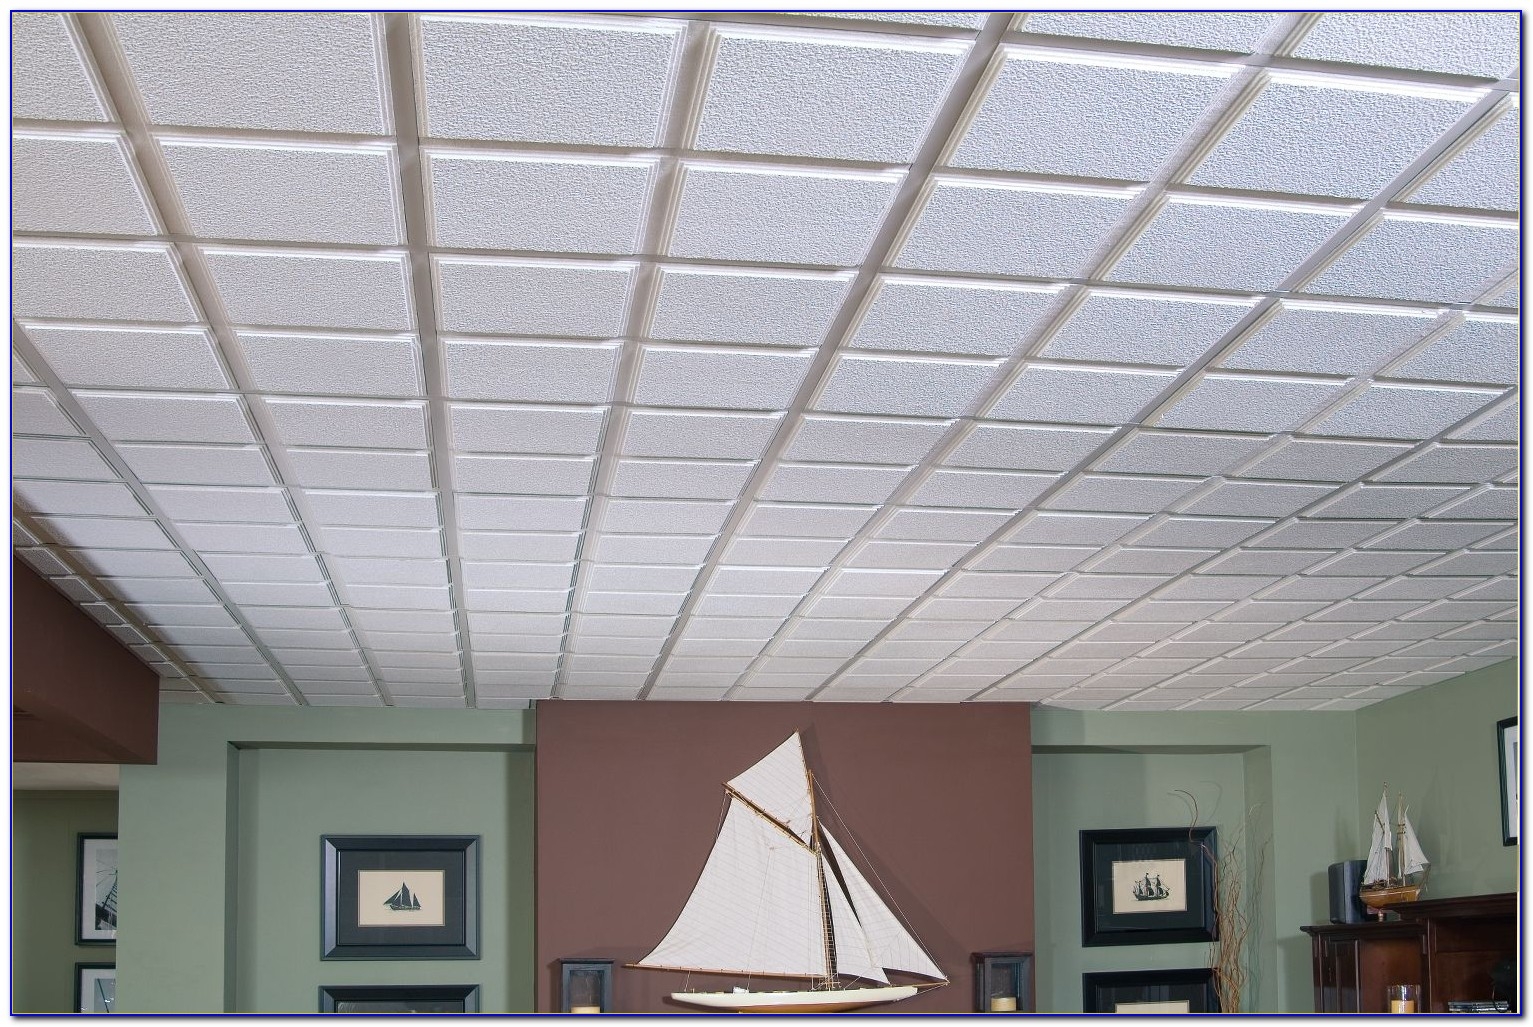 Armstrong 2x4 Second Look Ceiling Tile Armstrong 2×4 Second Look Ceiling Tile armstrong ceiling tile 2x4 second look tiles home design ideas 1533 X 1027